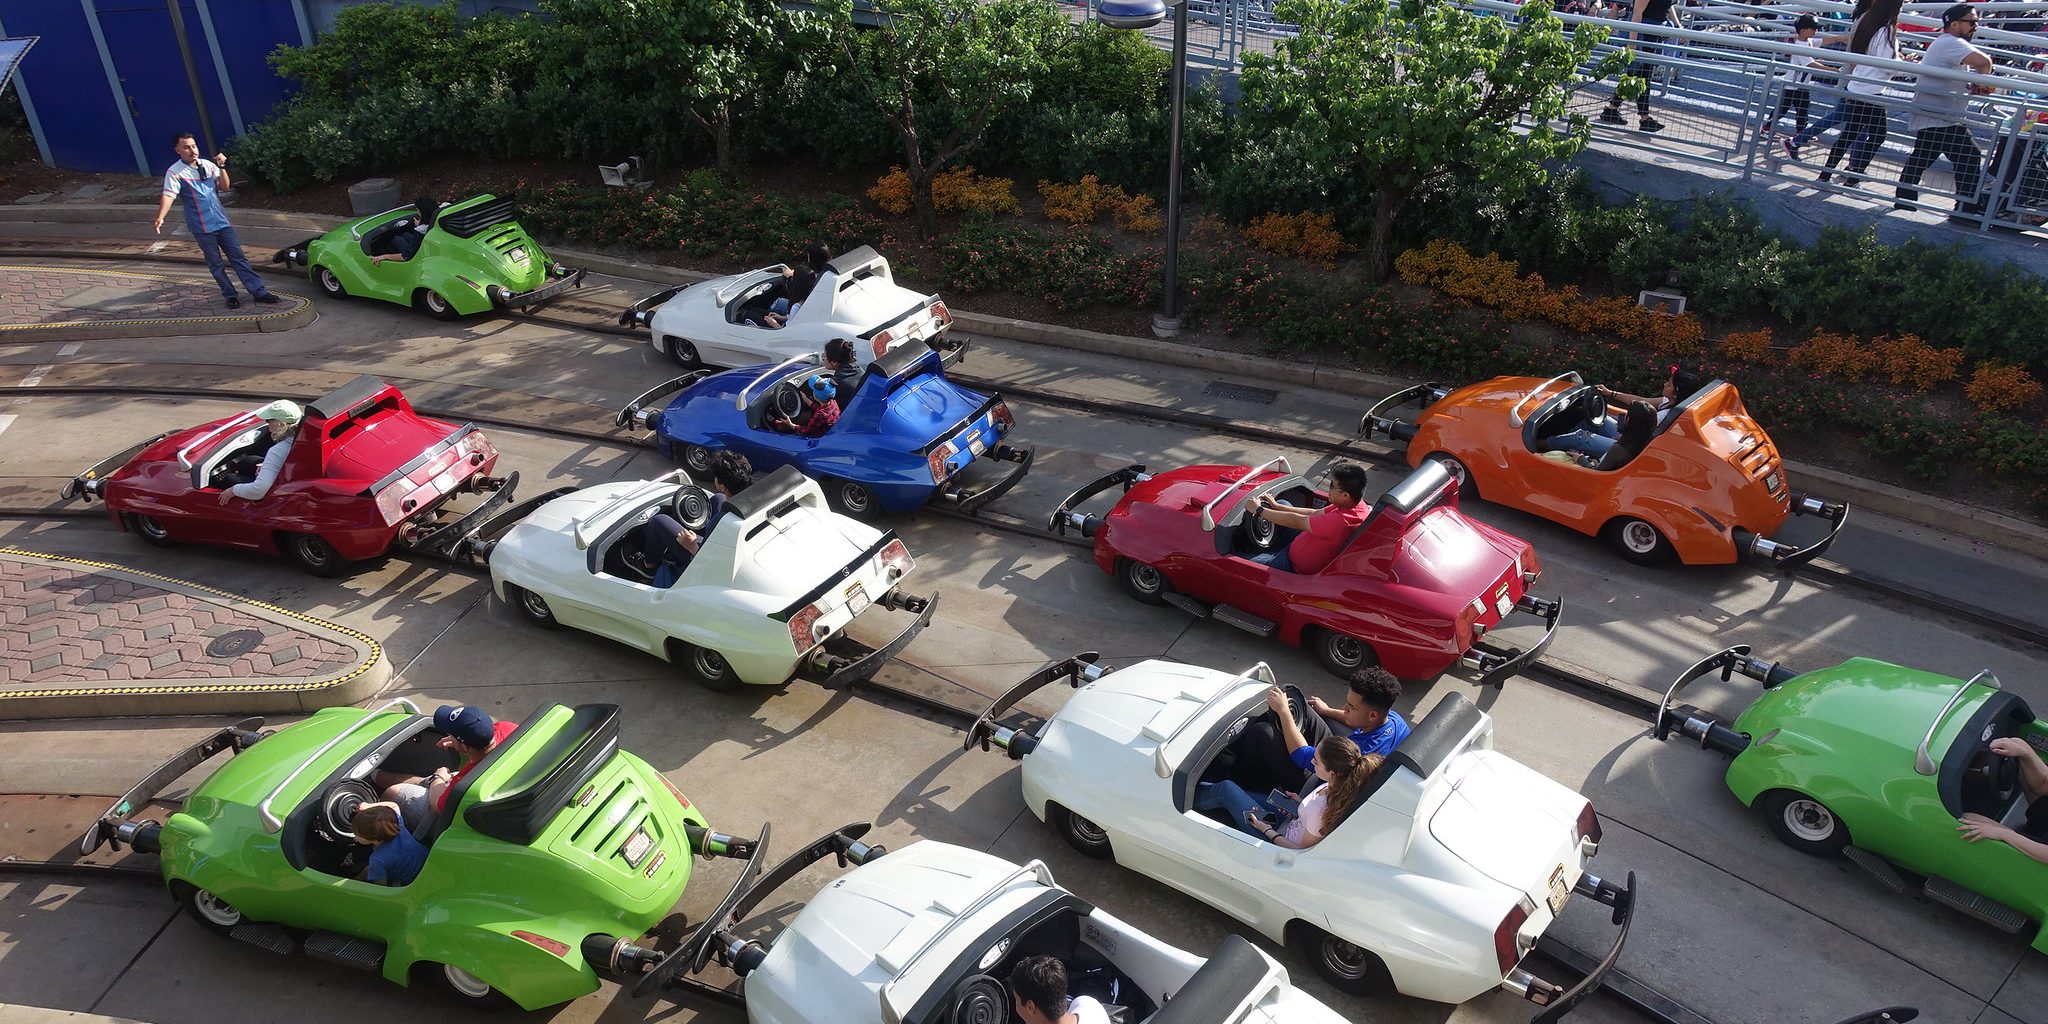 Disneyland faces pressure to electrify its stinky 'Autopia' ride, and quick